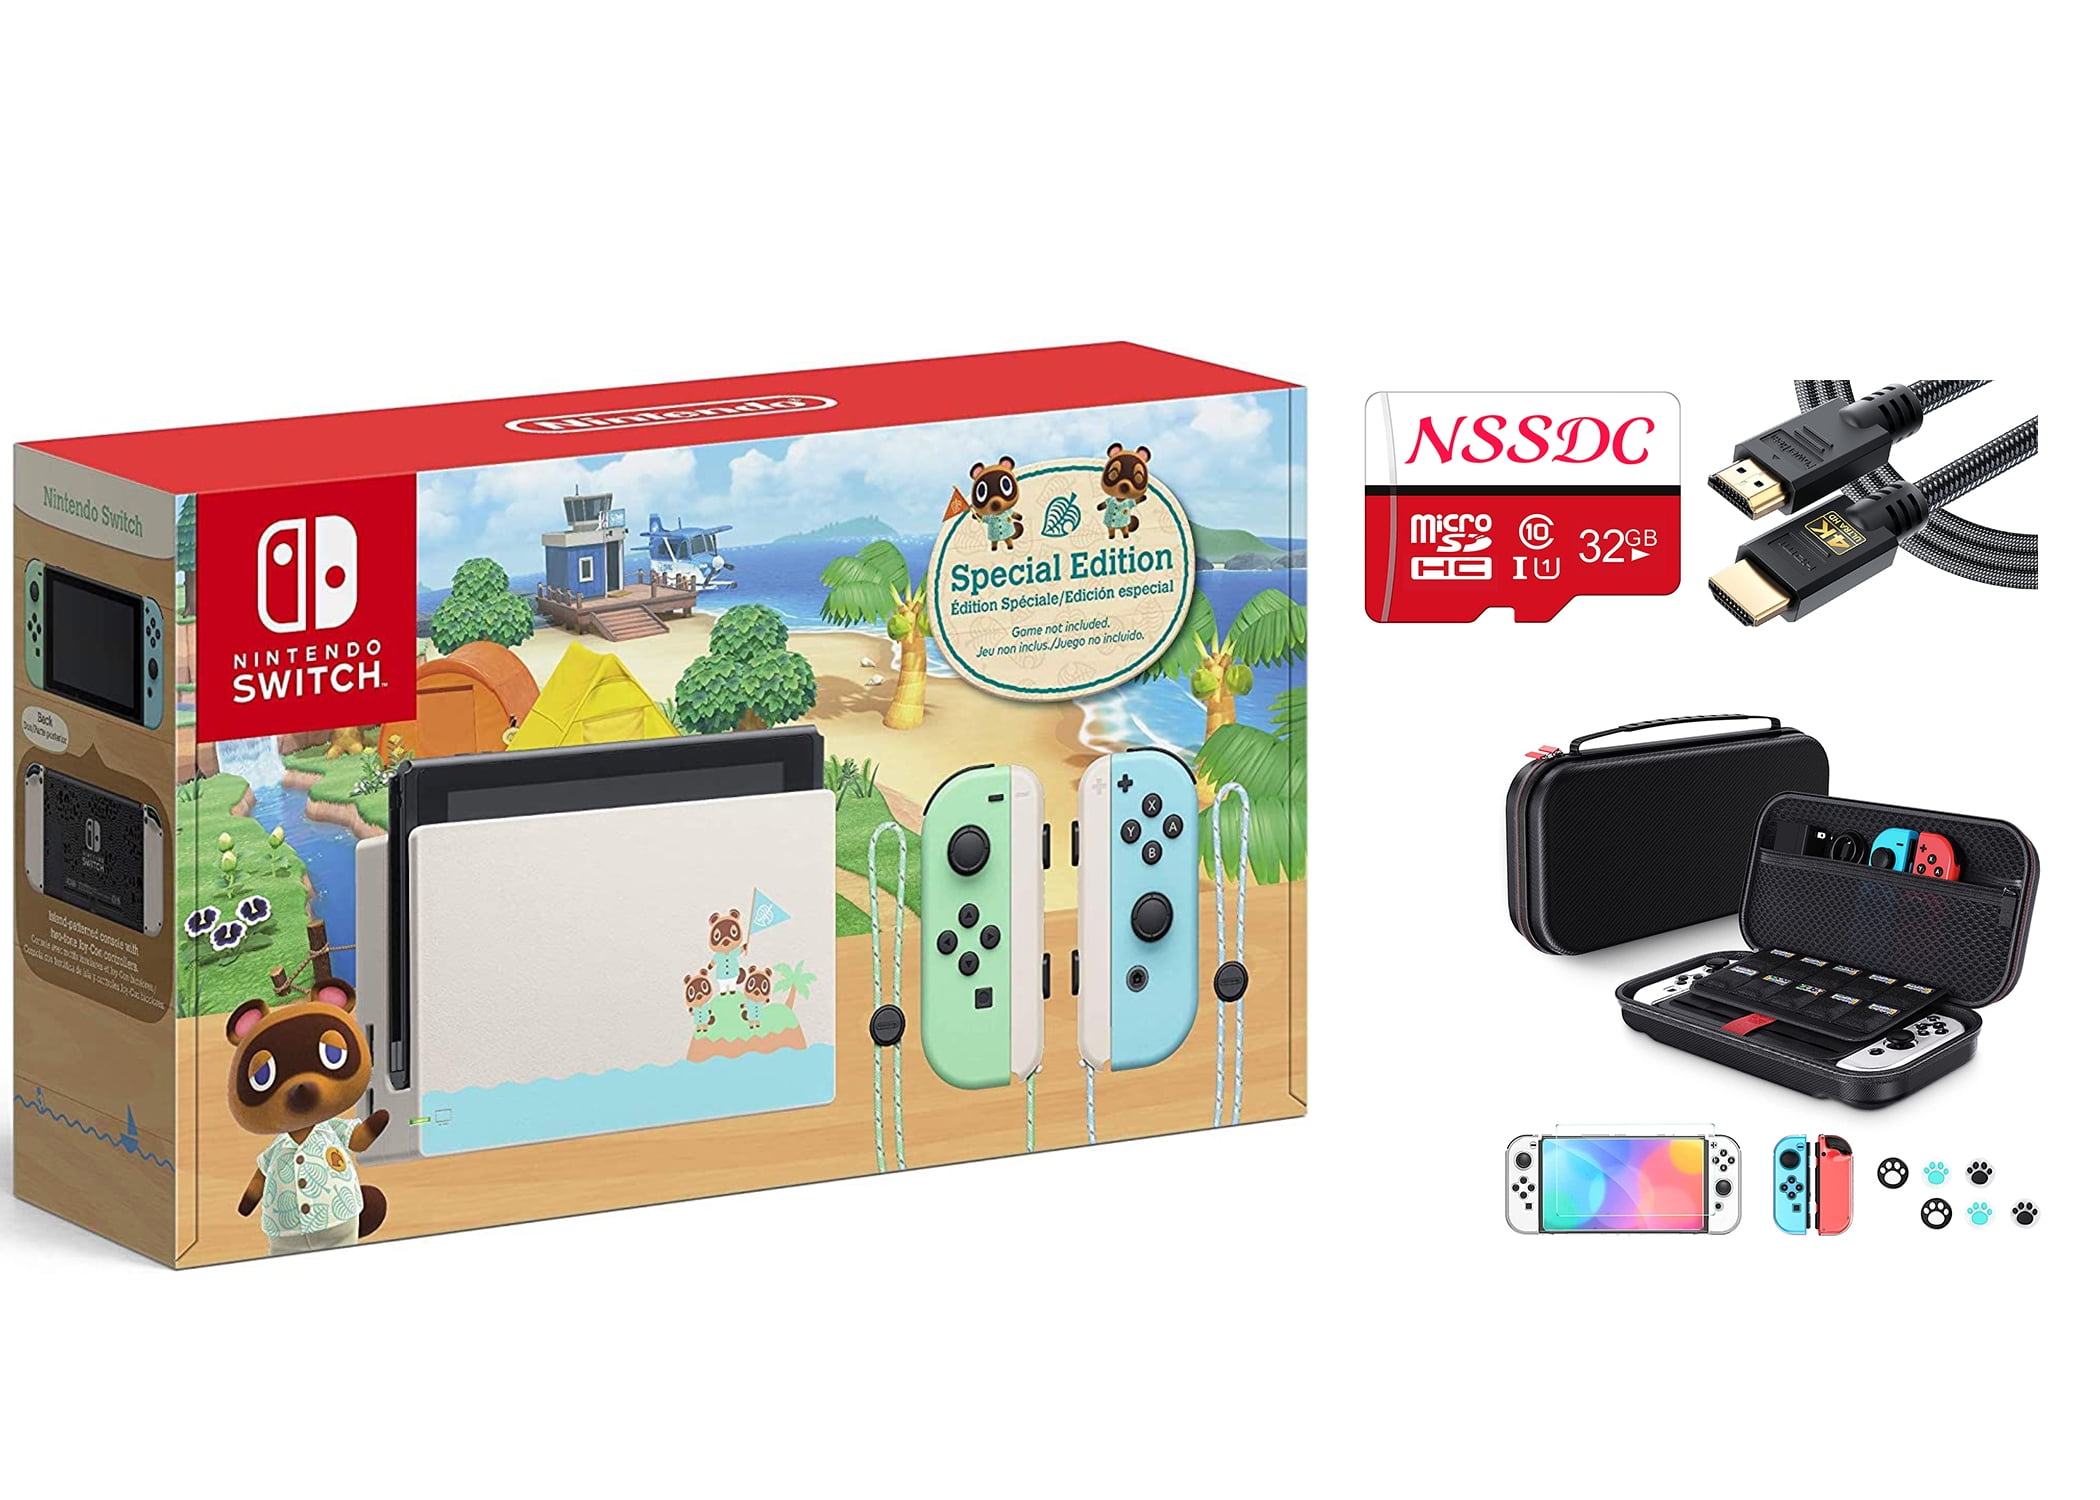 Switch Bundle: Nintendo Switch Animal Crossing New Horizons Edition 32GB Console with NSSDC SD Card, HDMI cable, Nintendo Accessories Portable Travel Carrying Case -